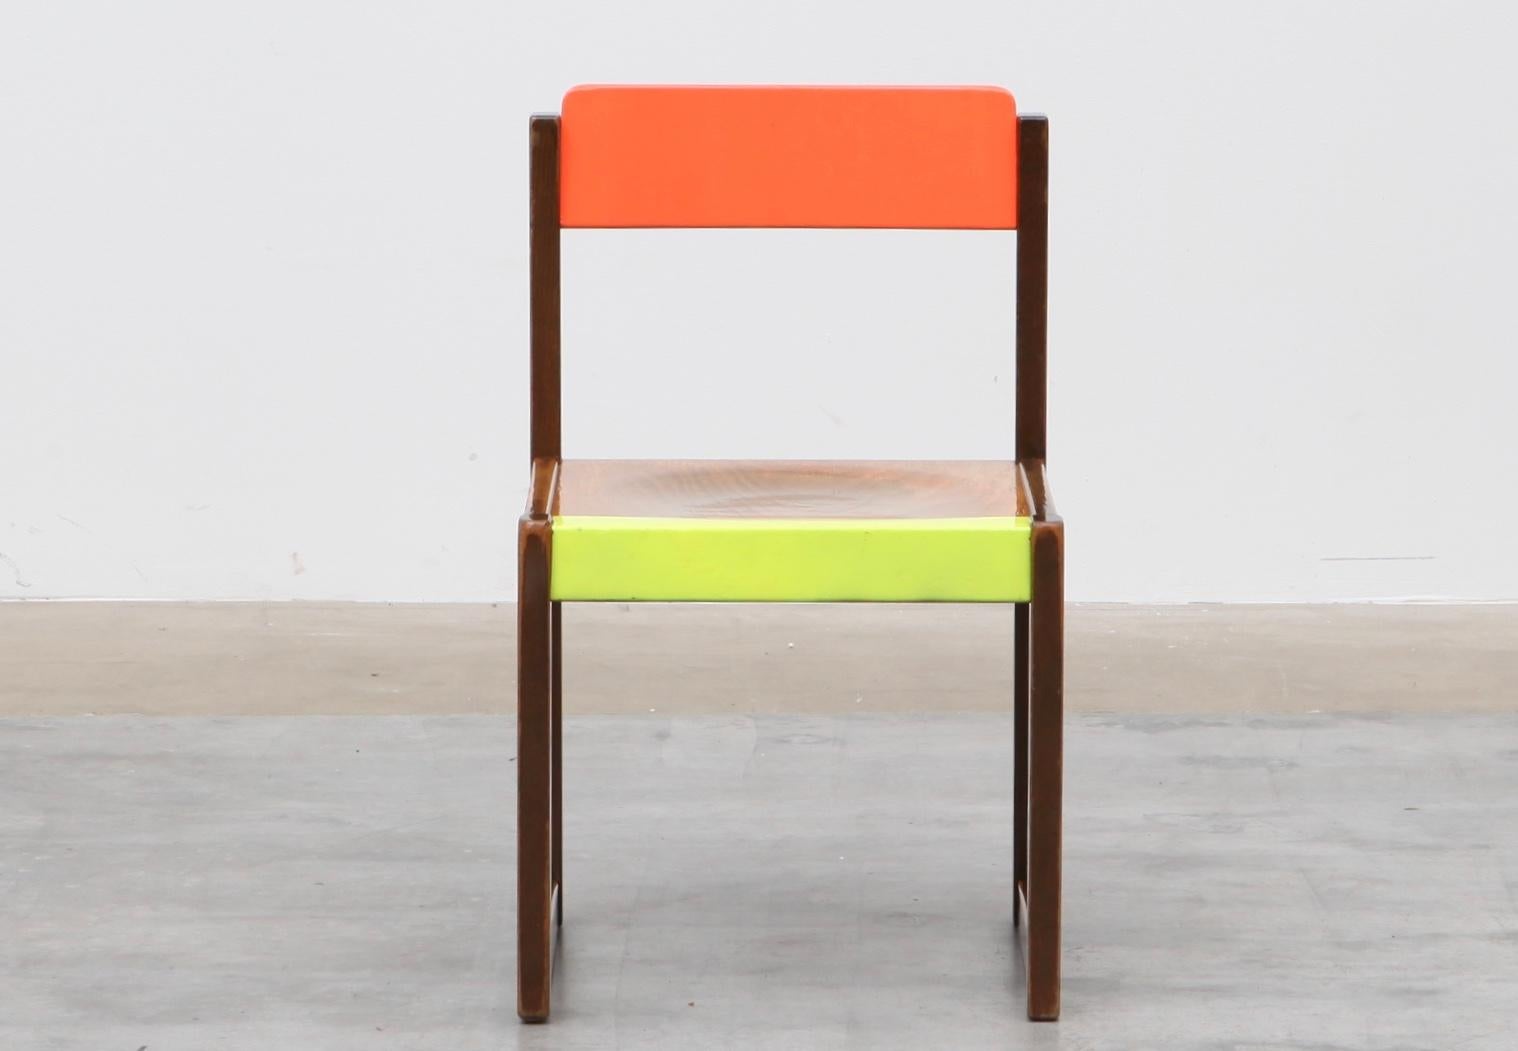 German Cube Children's Chair by Markus Friedrich Staab, 2011 For Sale